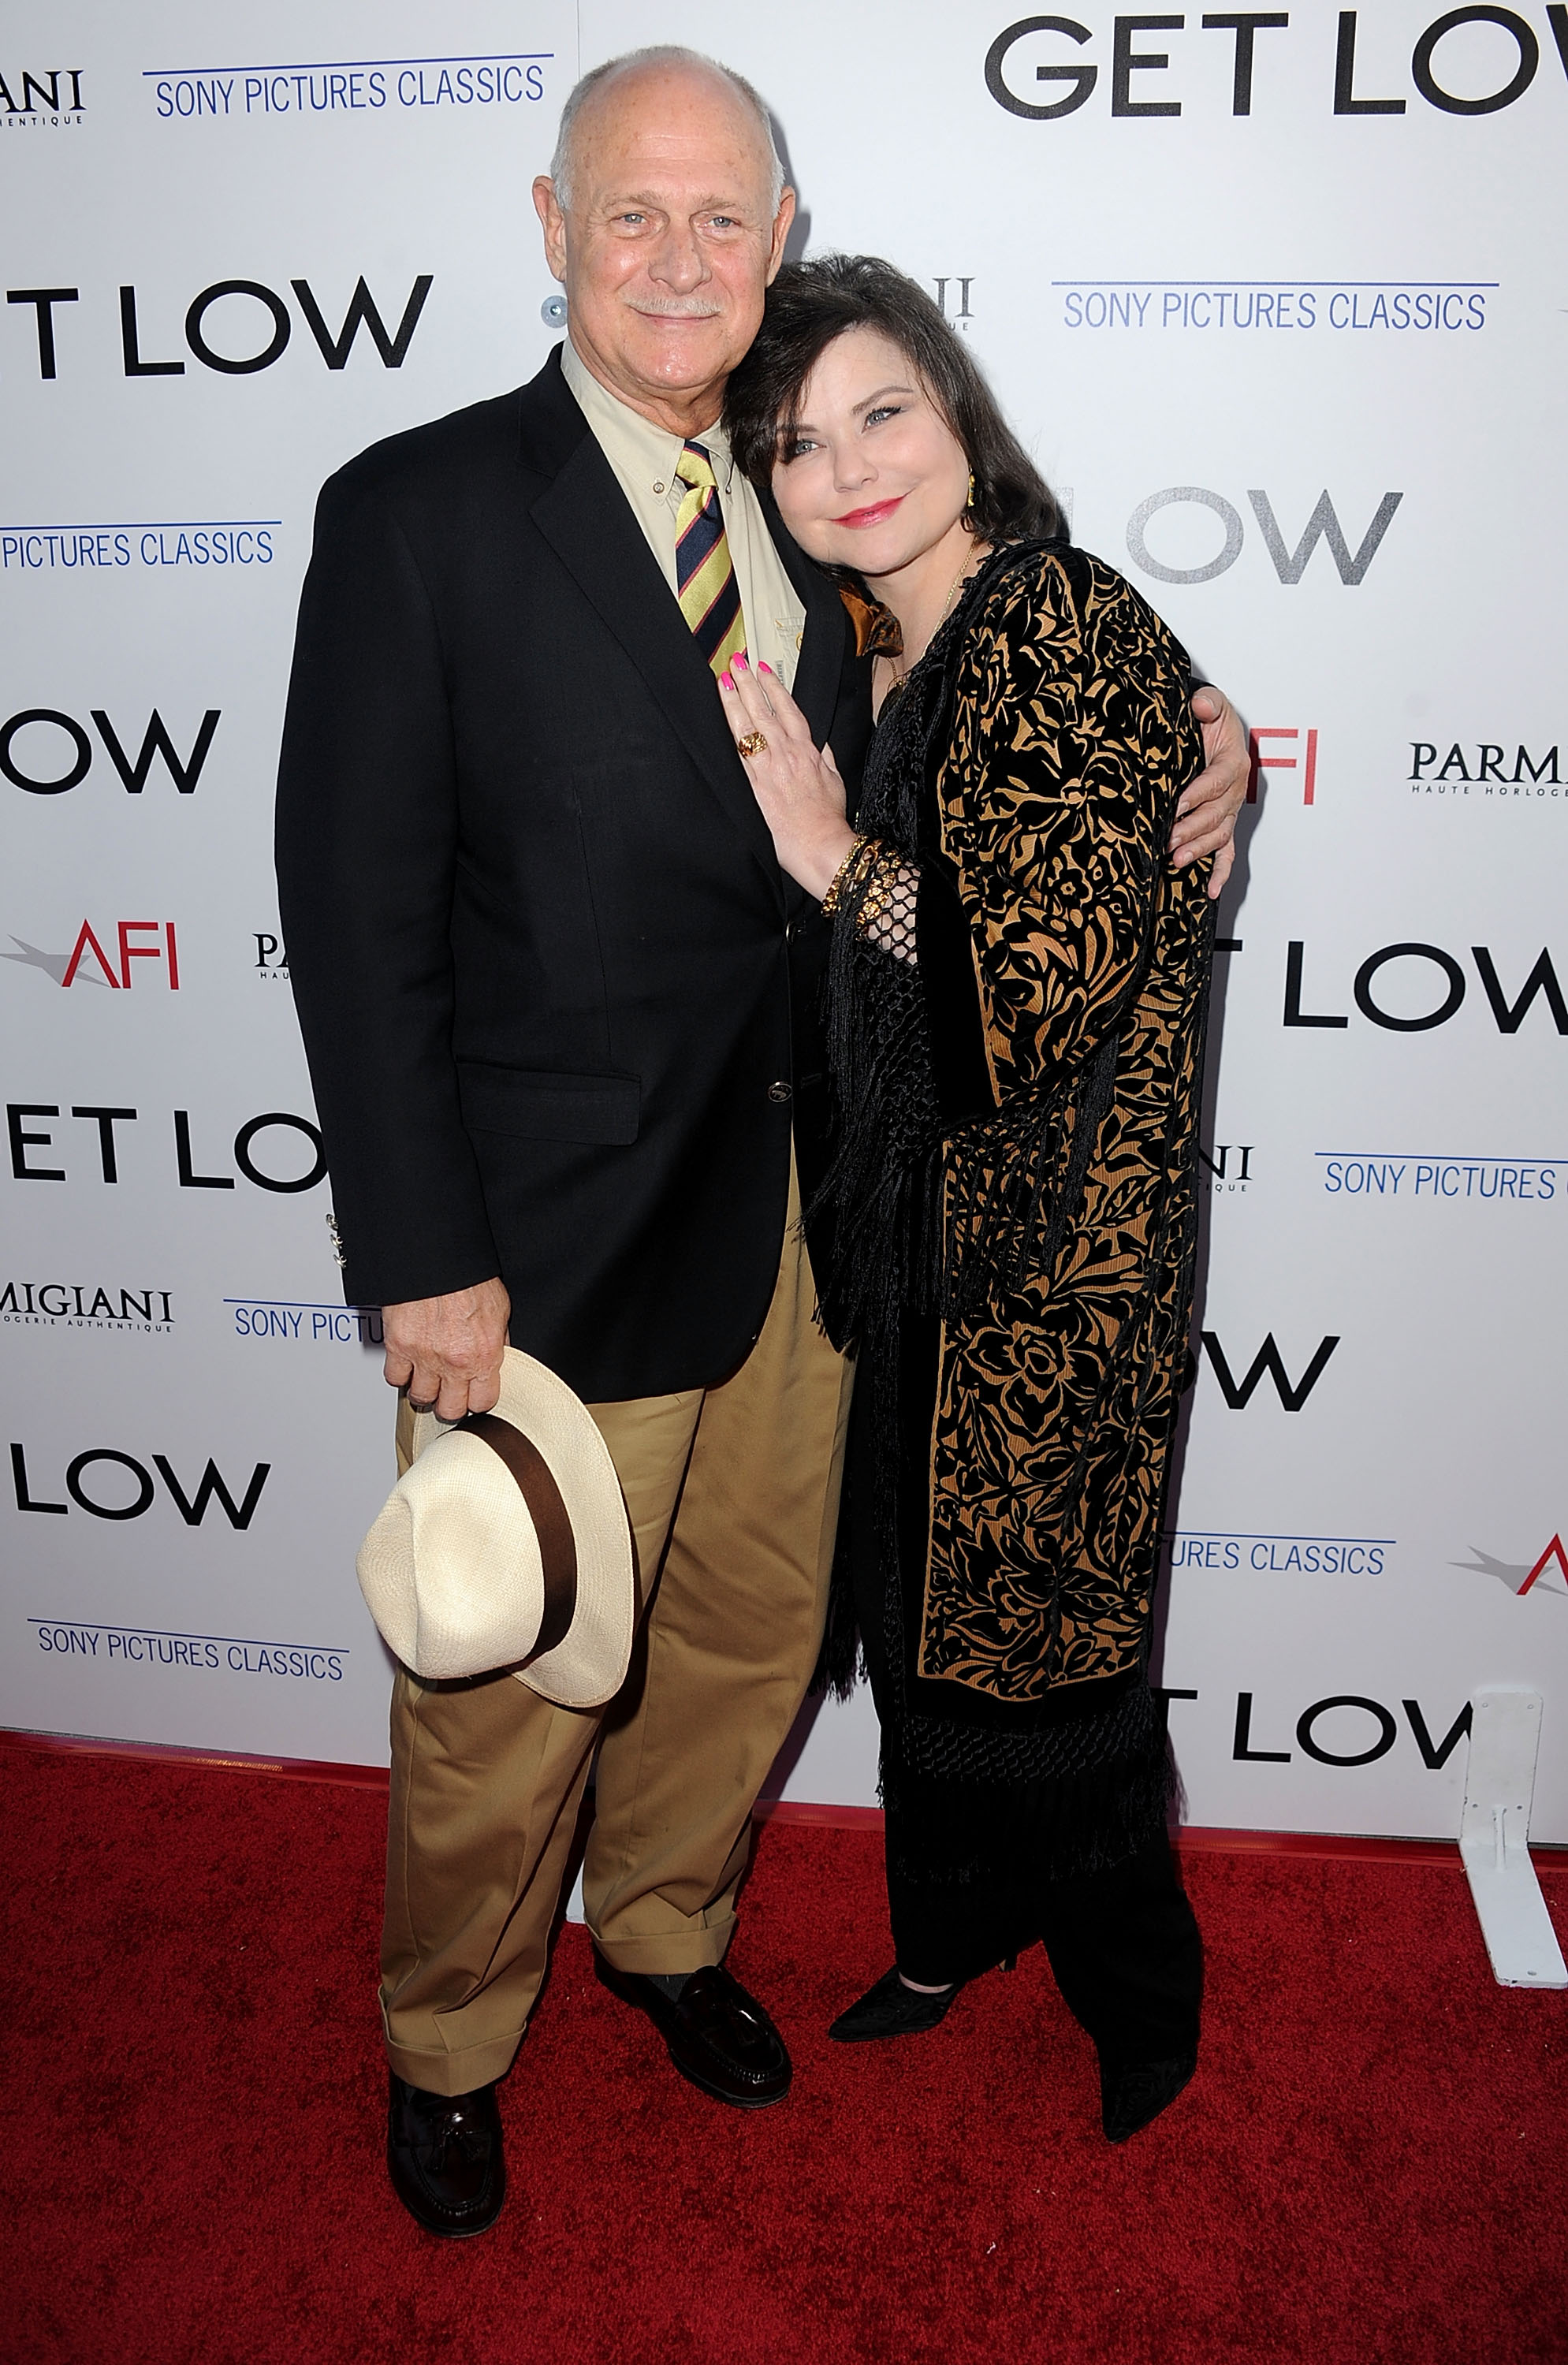 Actor Gerald McRaney (L) and actress Delta Burke arrive at AFI Associates & Sony Pictures Classics' premiere Of "Get Low" held at the Samuel Goldwyn Theater inside The Academy of Motion Picture Arts and Sciences on July 27, 2010, in Beverly Hills, California. | Source: Getty Images